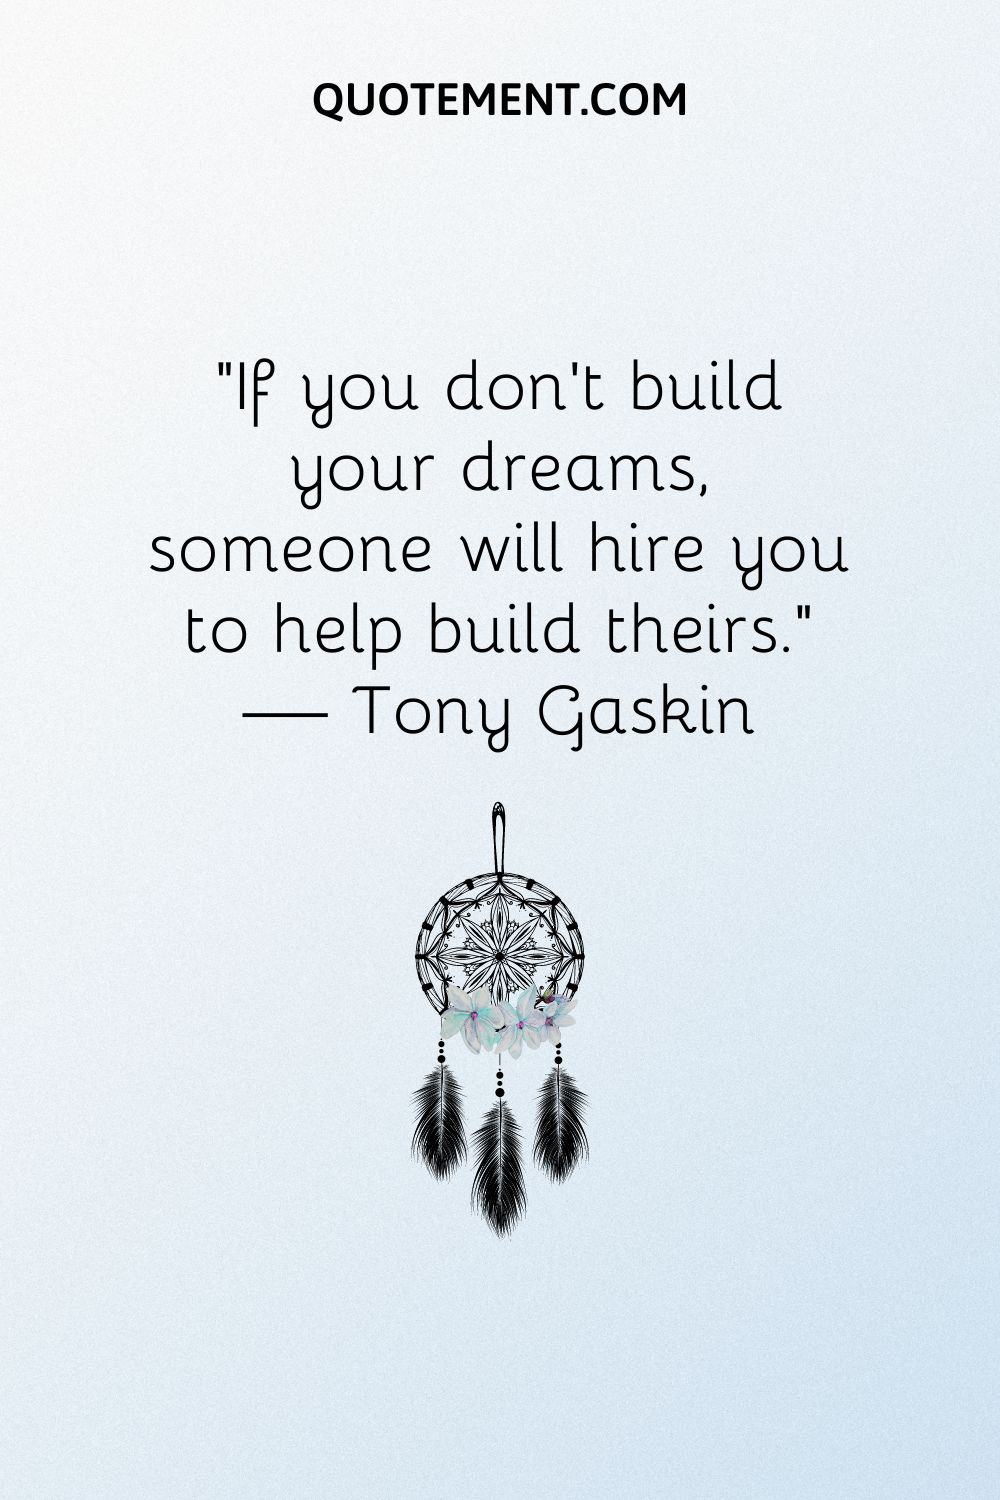 “If you don’t build your dreams, someone will hire you to help build theirs.” — Tony Gaskin